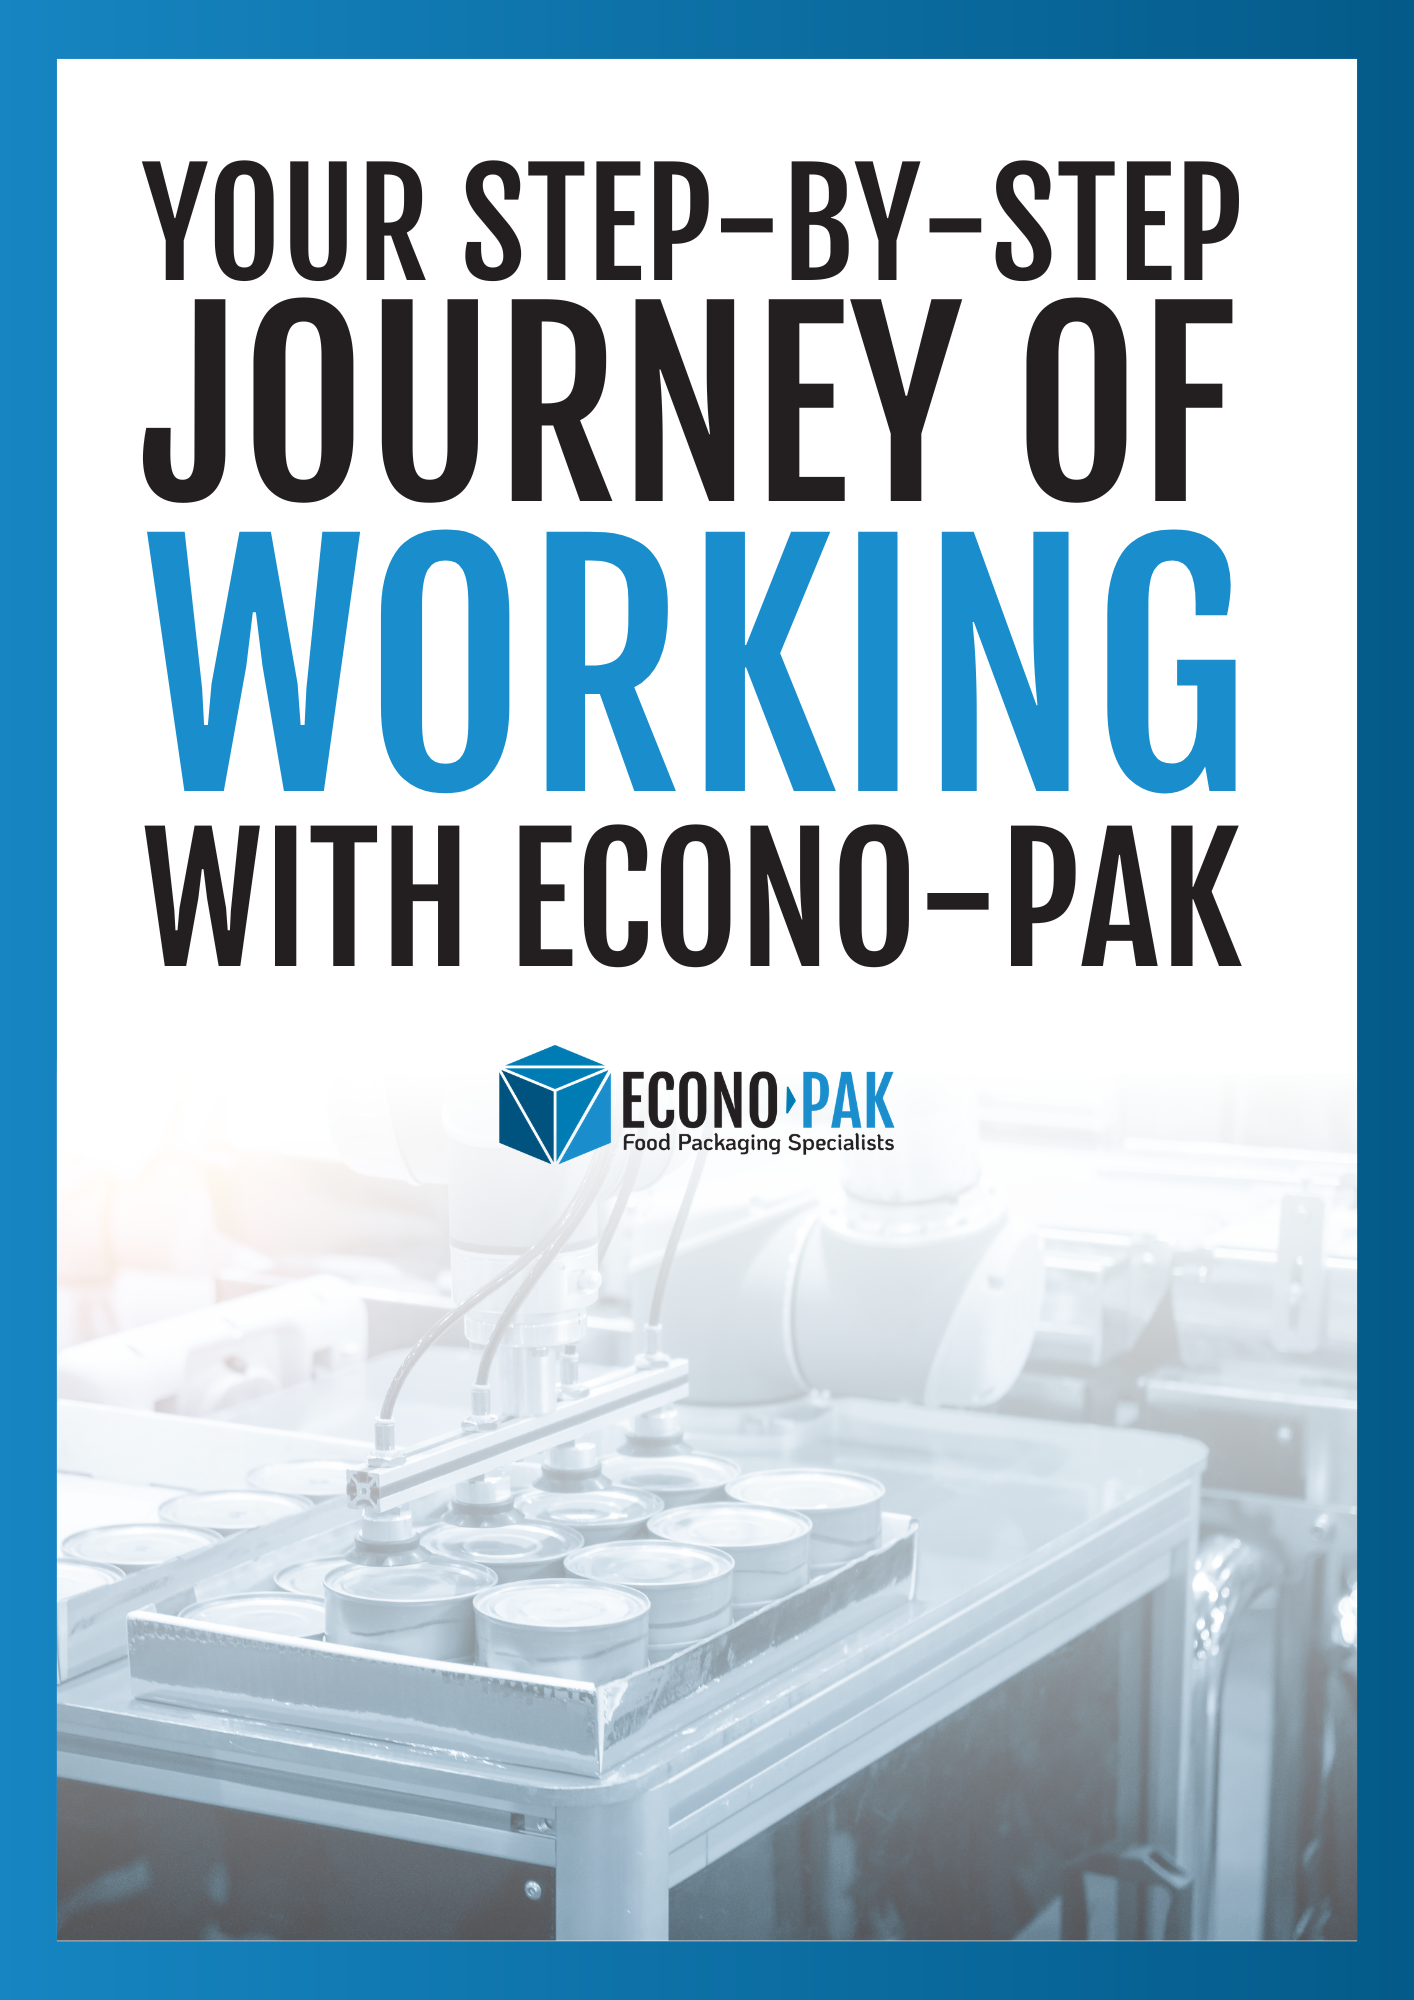 Your Step-by-Step Journey of Working with Econo-Pak